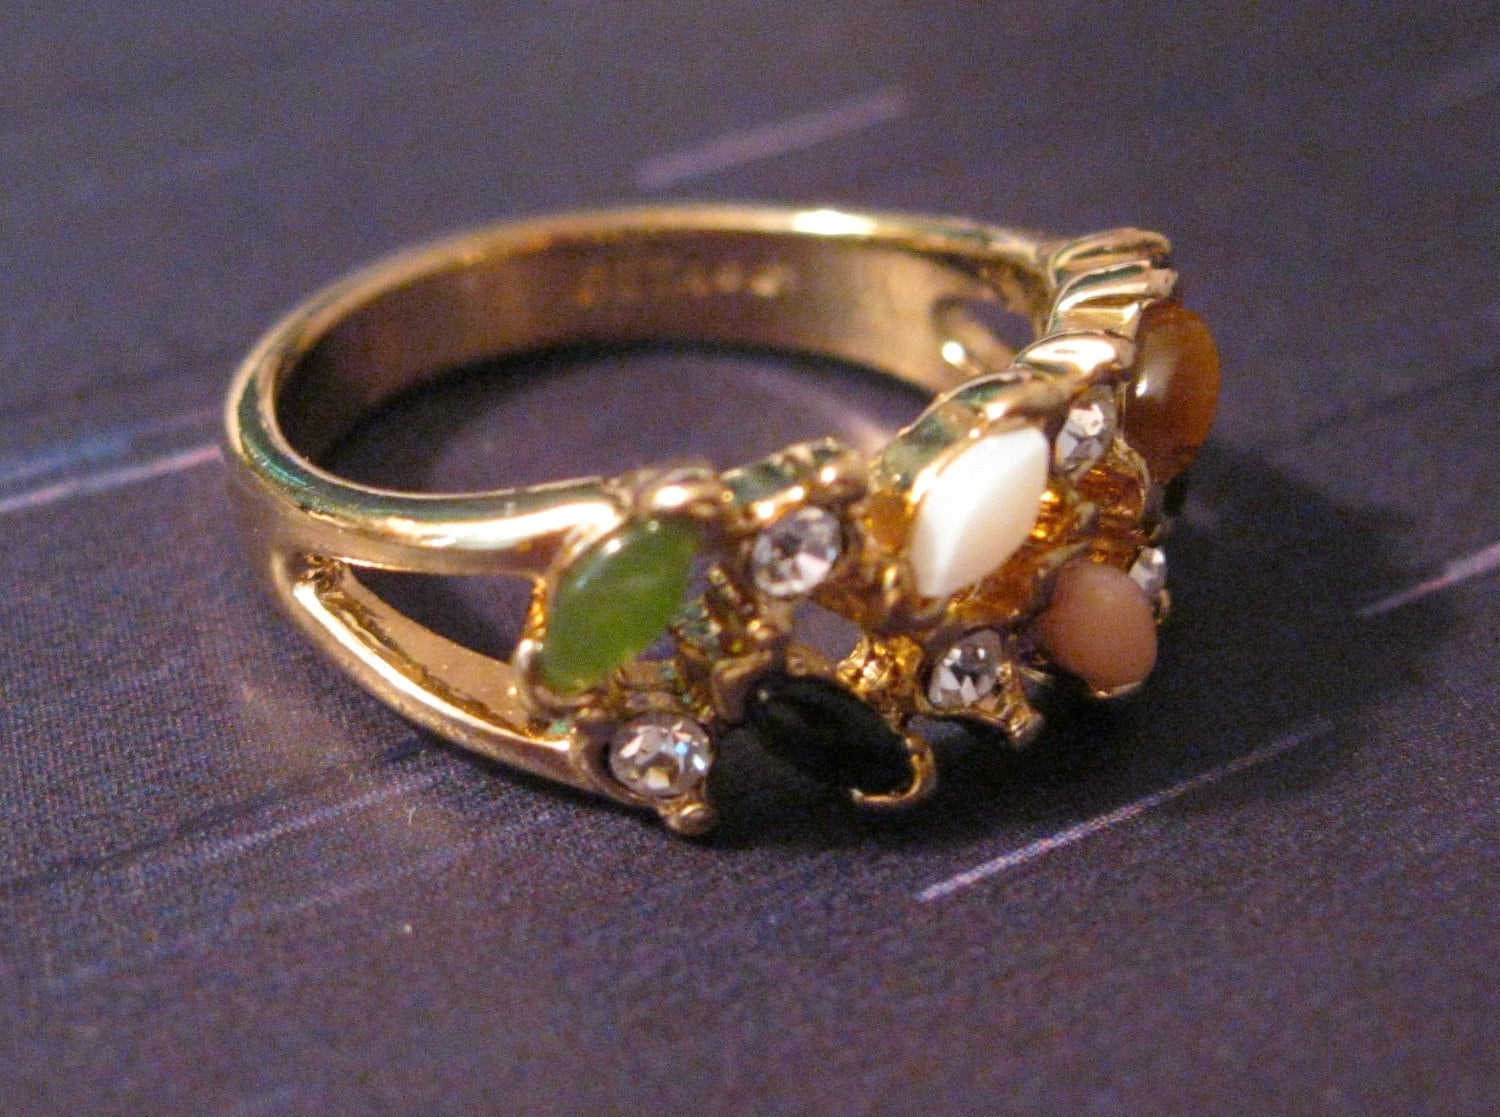 Vintage Ring Signed Seta Multi Colored Stones by CarlyBette